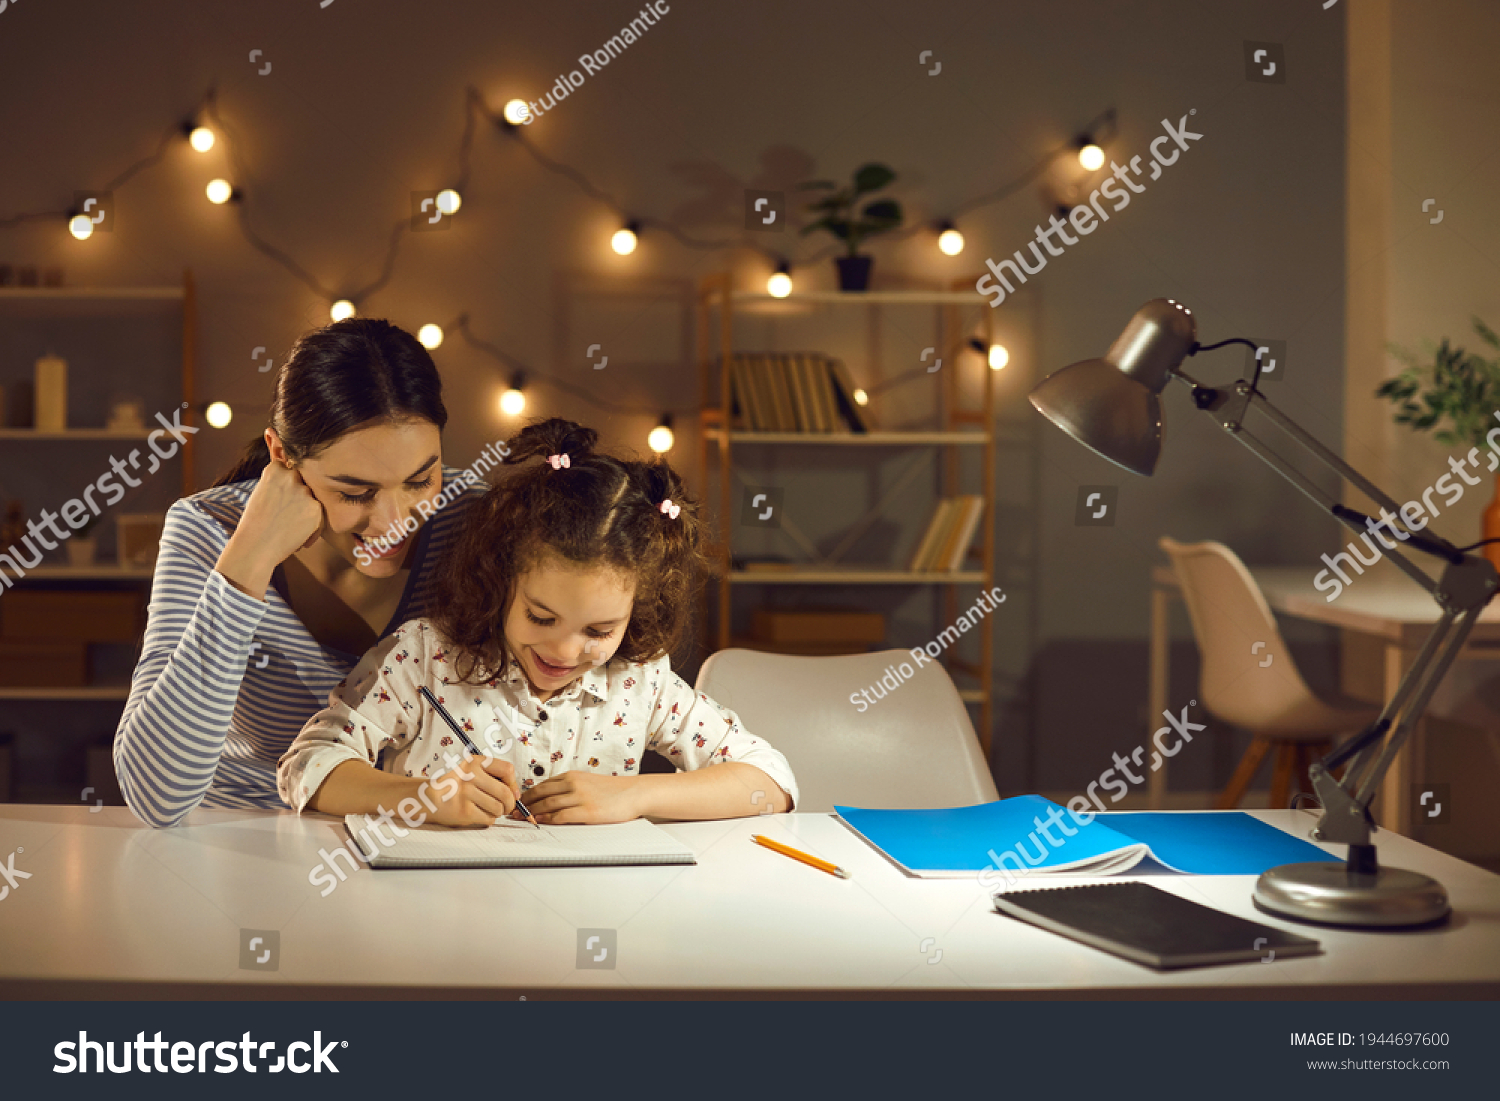 Parent helping child. Happy family doing homework in the evening. Mother and daughter working on school assignment sitting at desk with lamp in cozy dark room with LED lights. Kids learning concept #1944697600